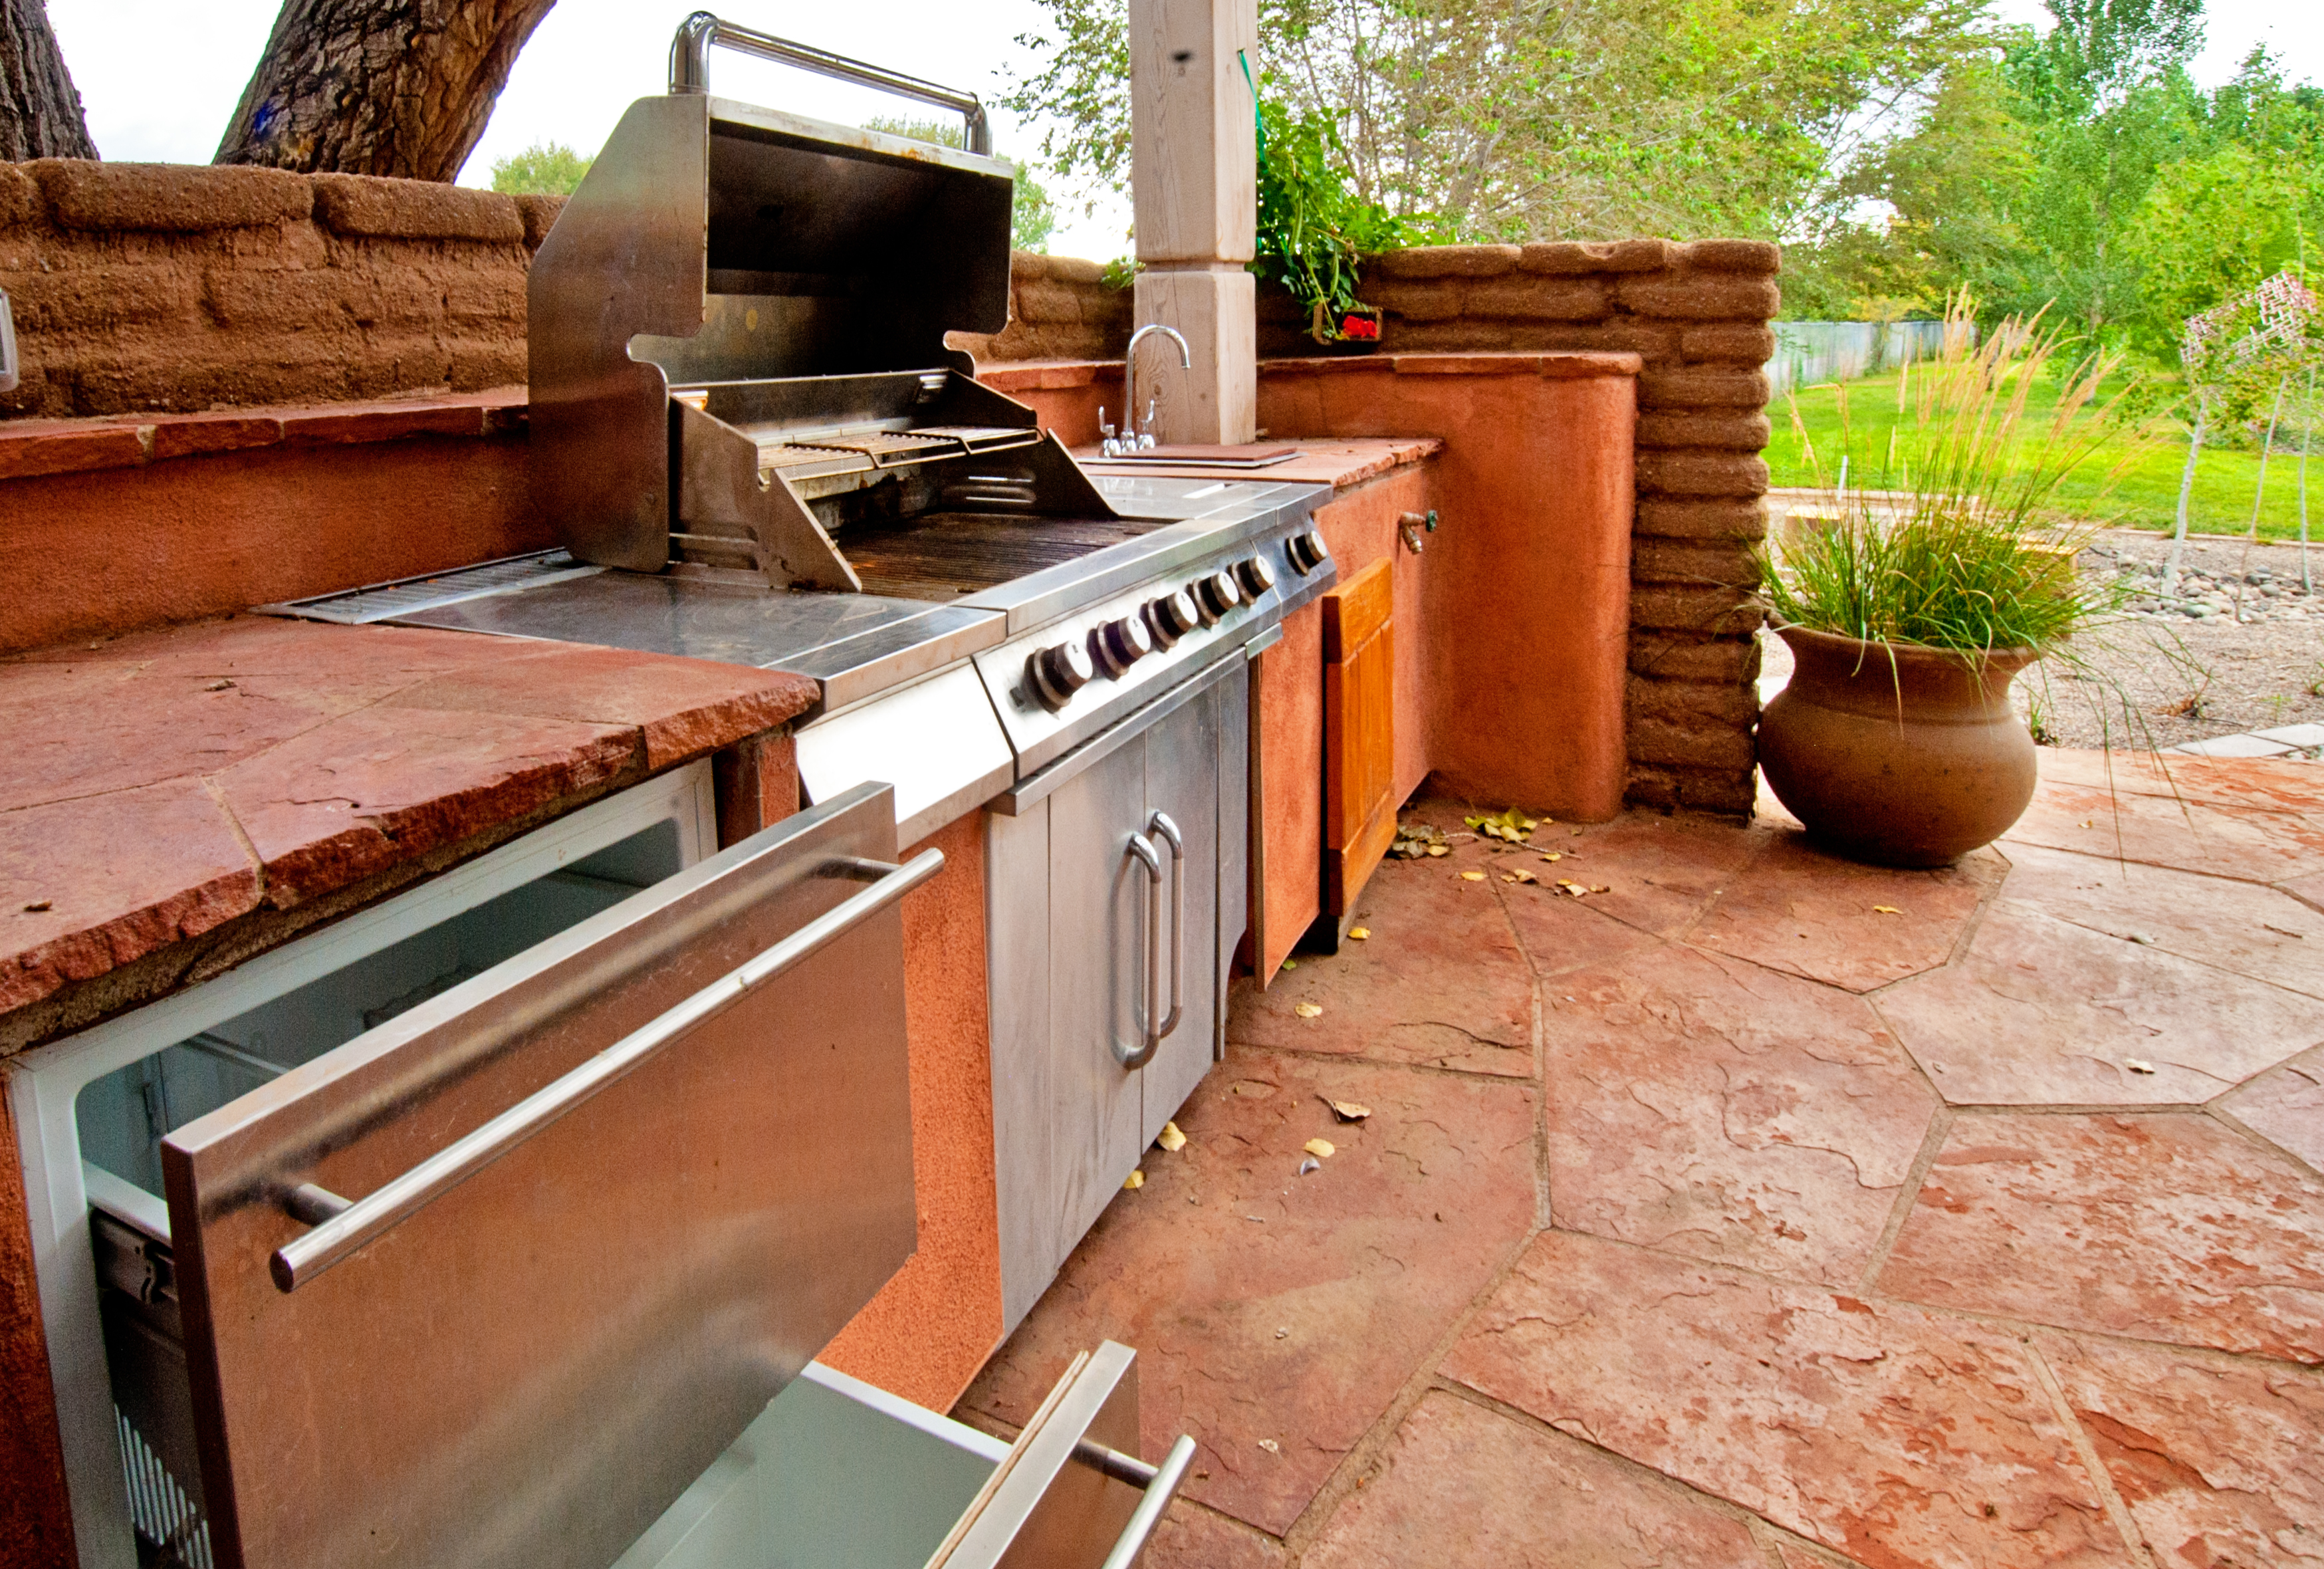 The Best Countertop Materials for Outdoor Kitchens